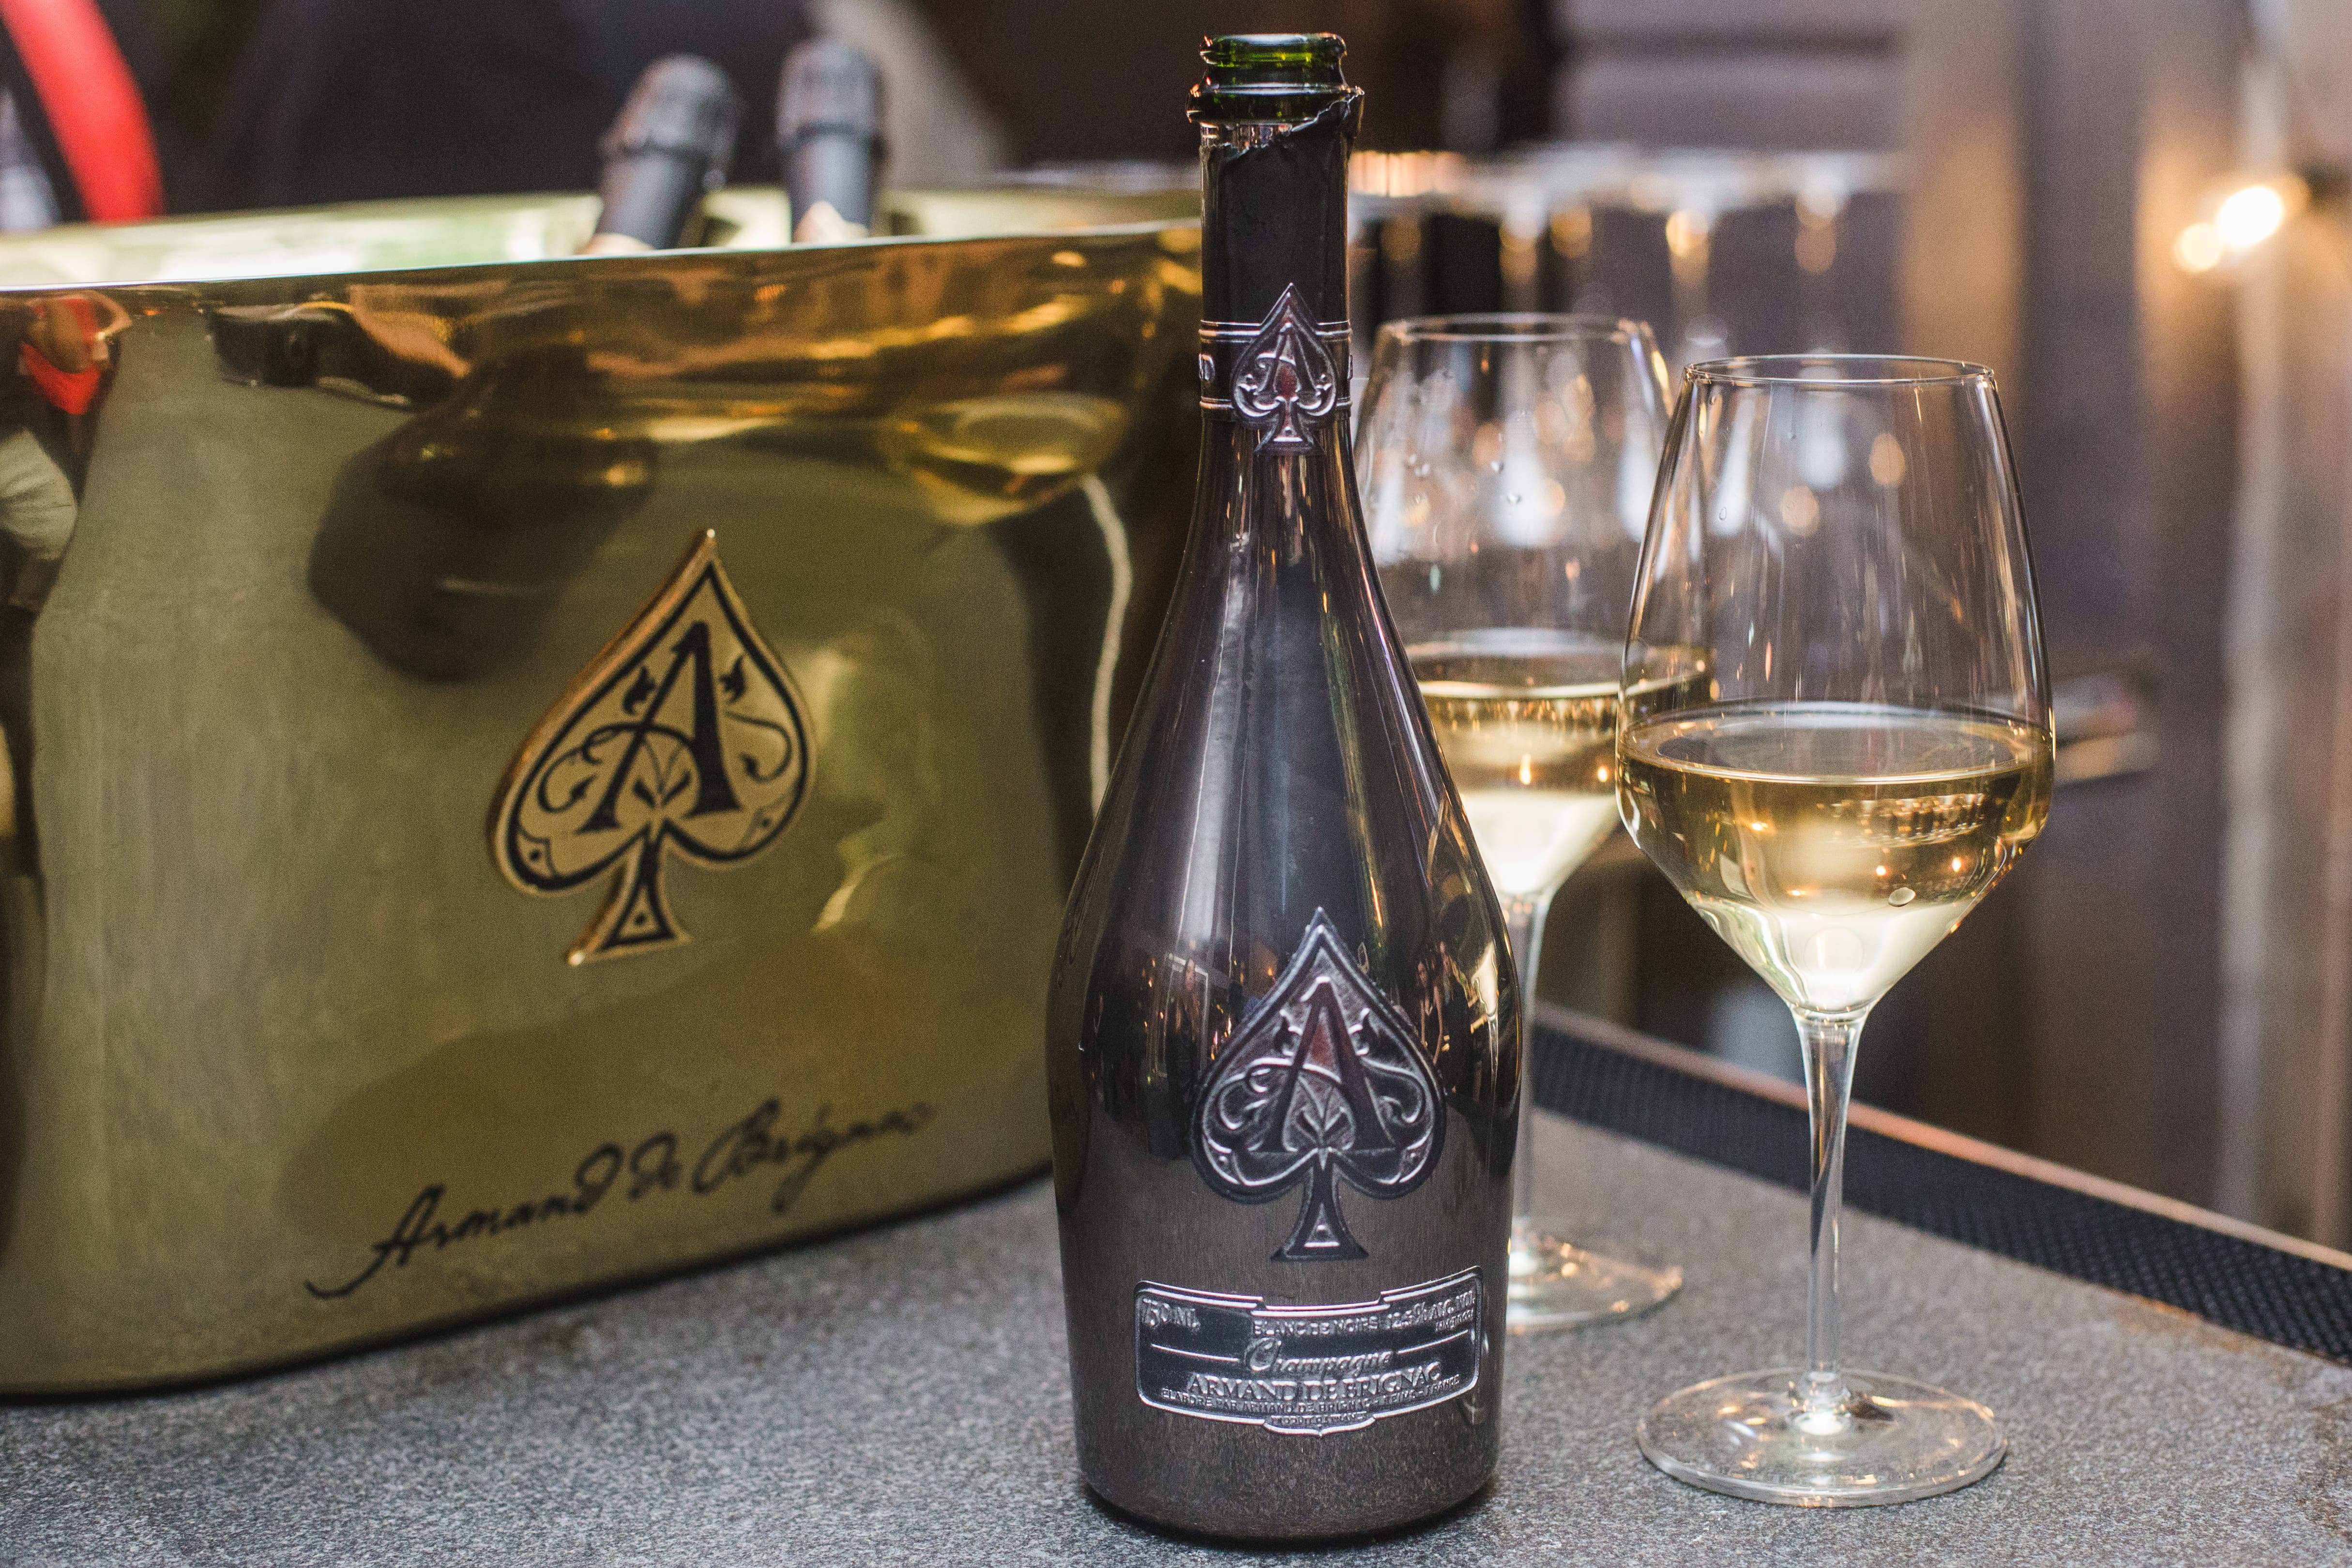 Dom Perignon and Armand De Brignac Champagne Tastings  Let's pop the  bubbly! 🍾 Join us tomorrow 11/12 in any of our NJ stores from 12-2pm,  where we'll be pouring the finest